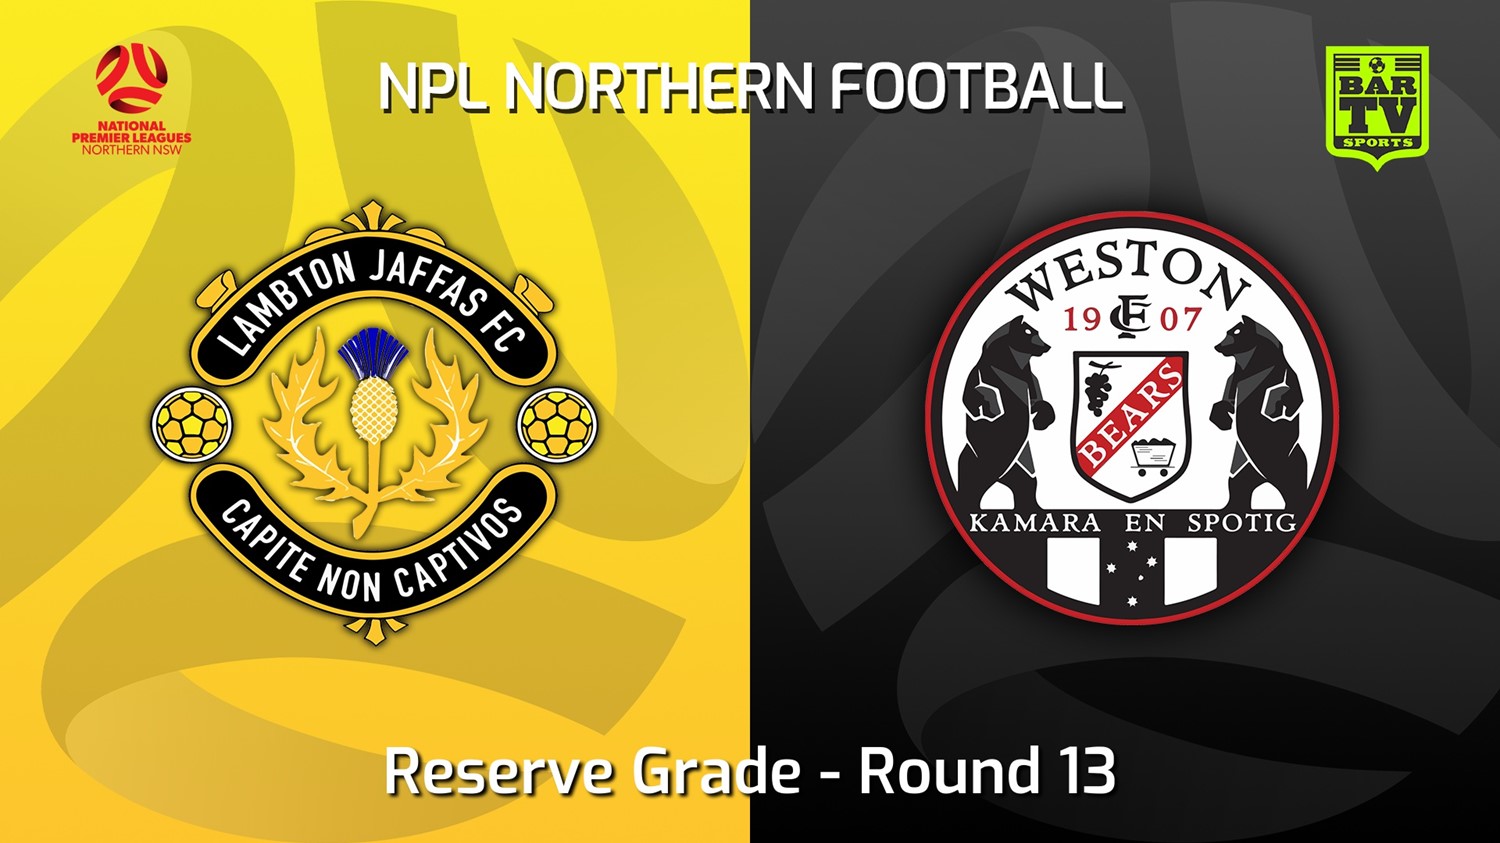 220604-NNSW NPLM Res Round 13 - Lambton Jaffas FC Res v Weston Workers FC Res Minigame Slate Image